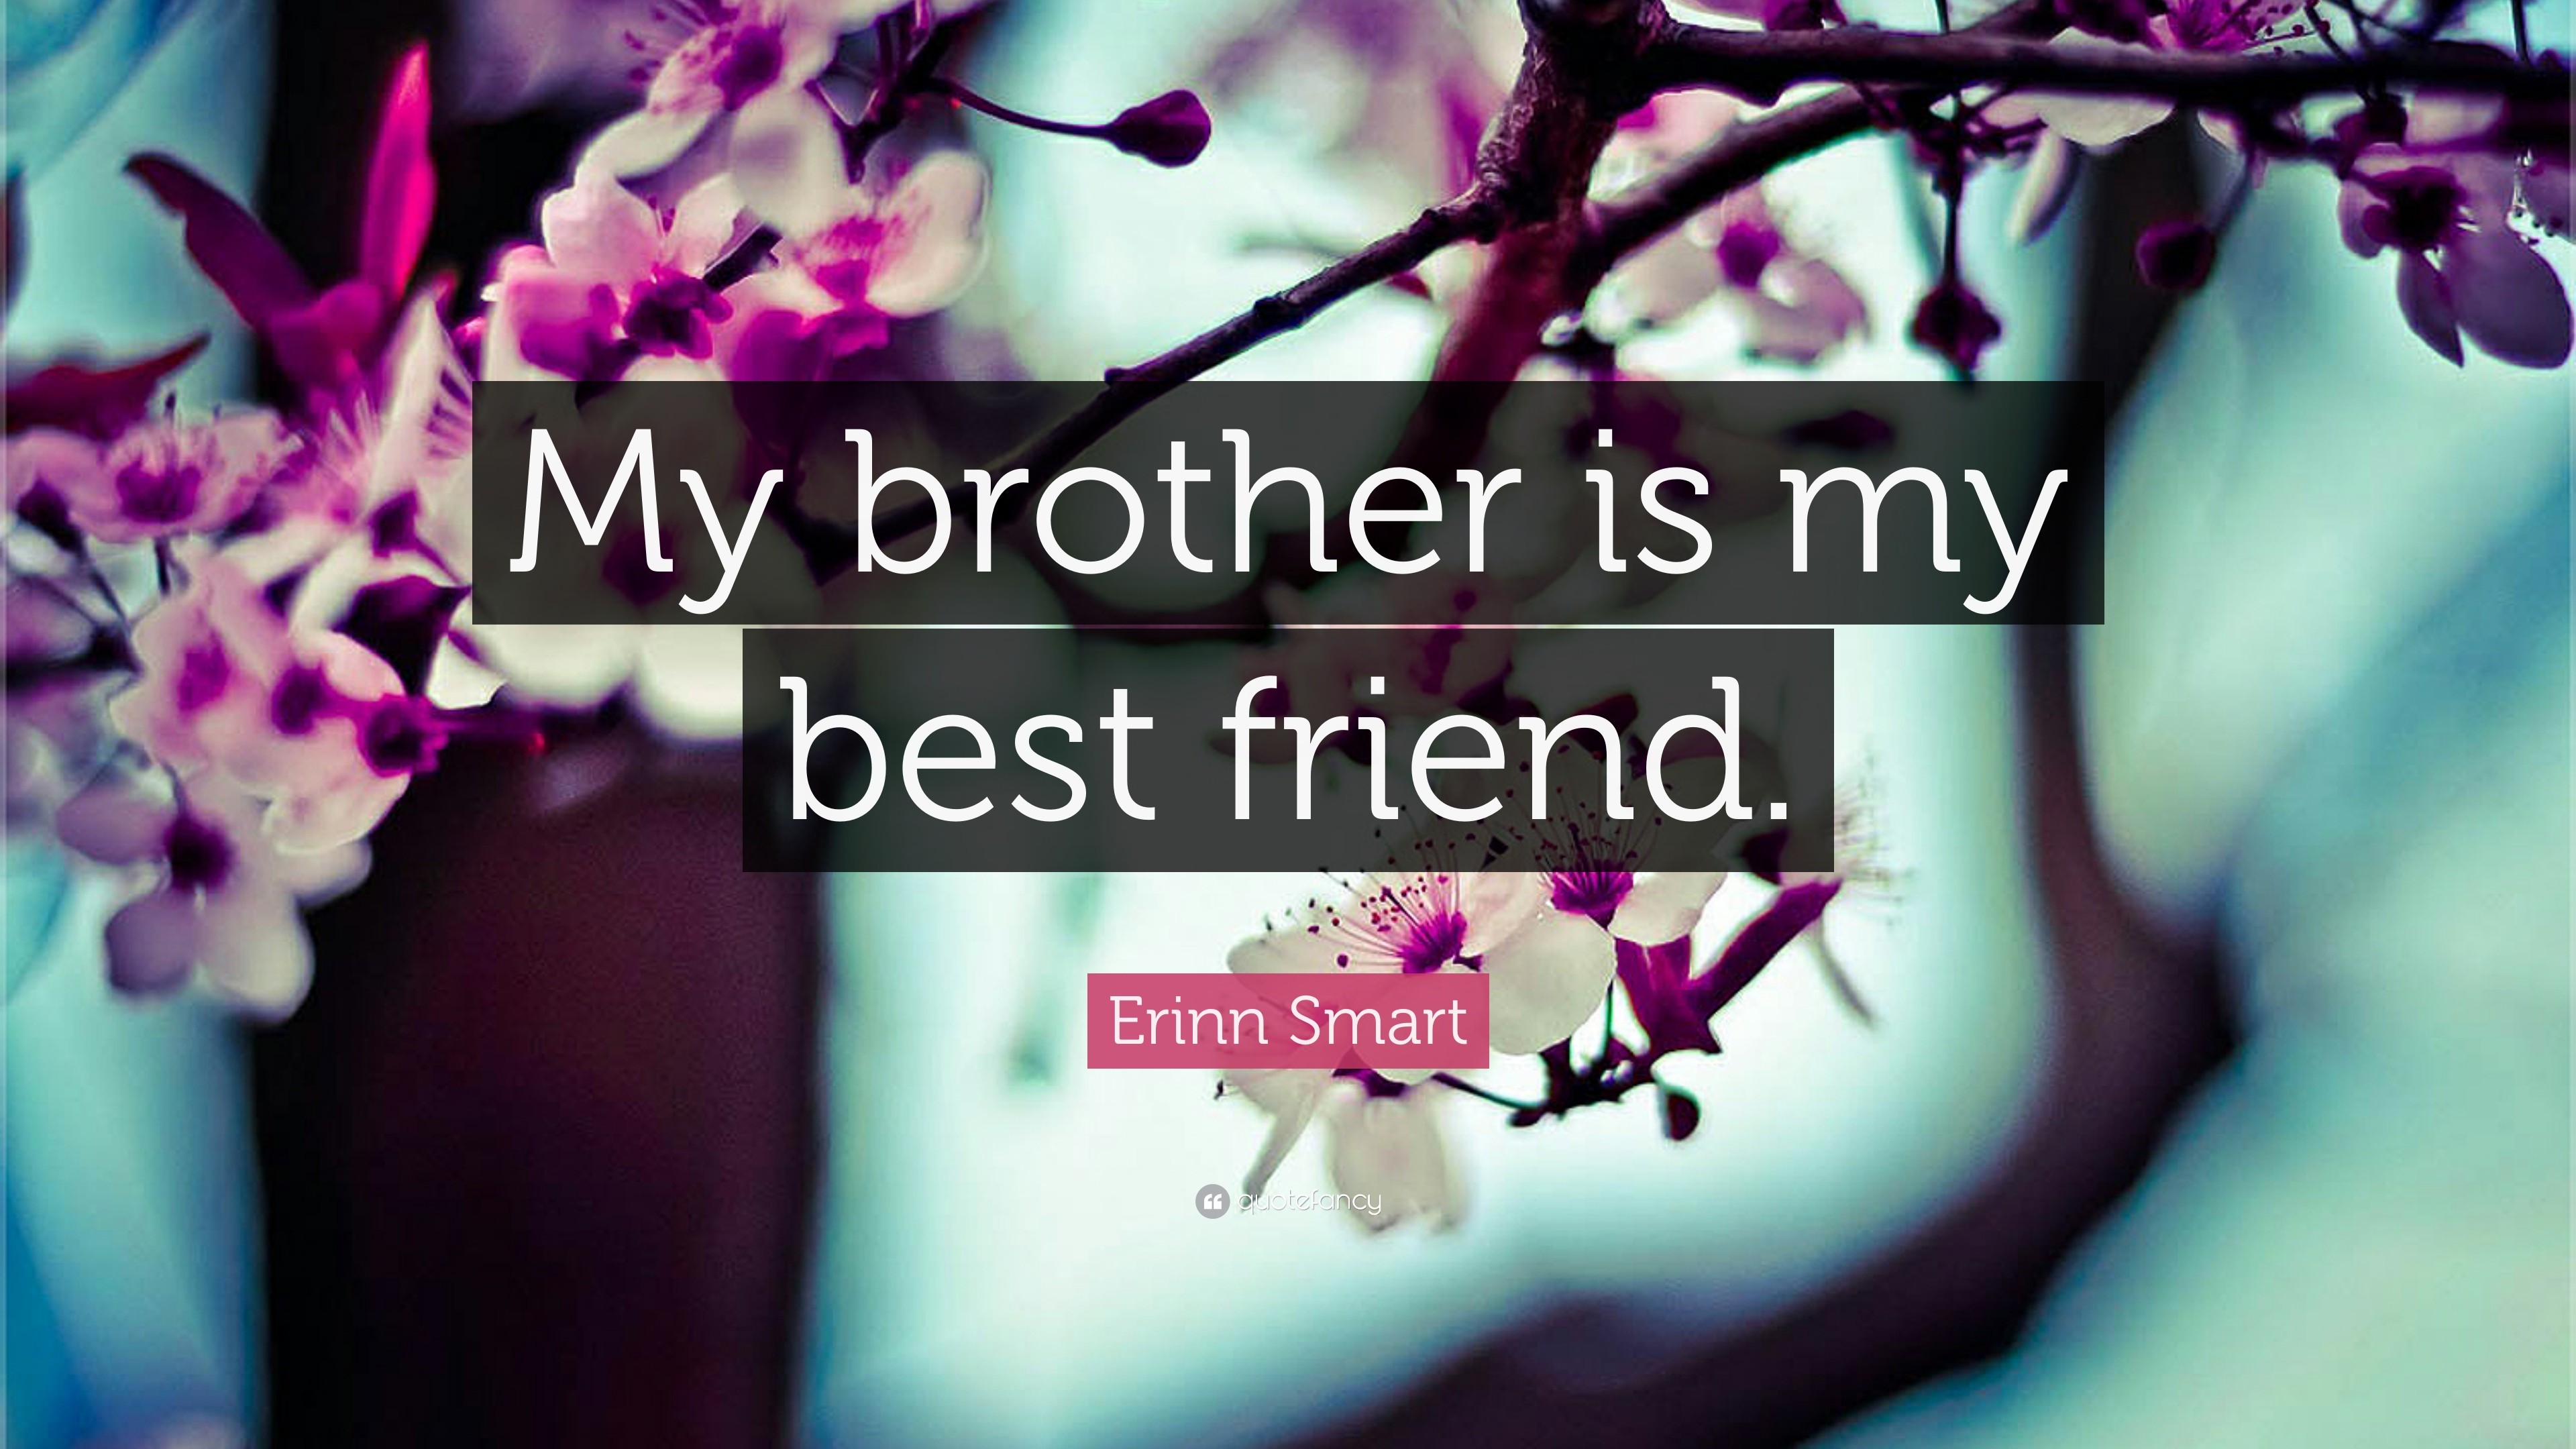 3840x2160 Erinn Smart Quote: “My brother is my best friend.”